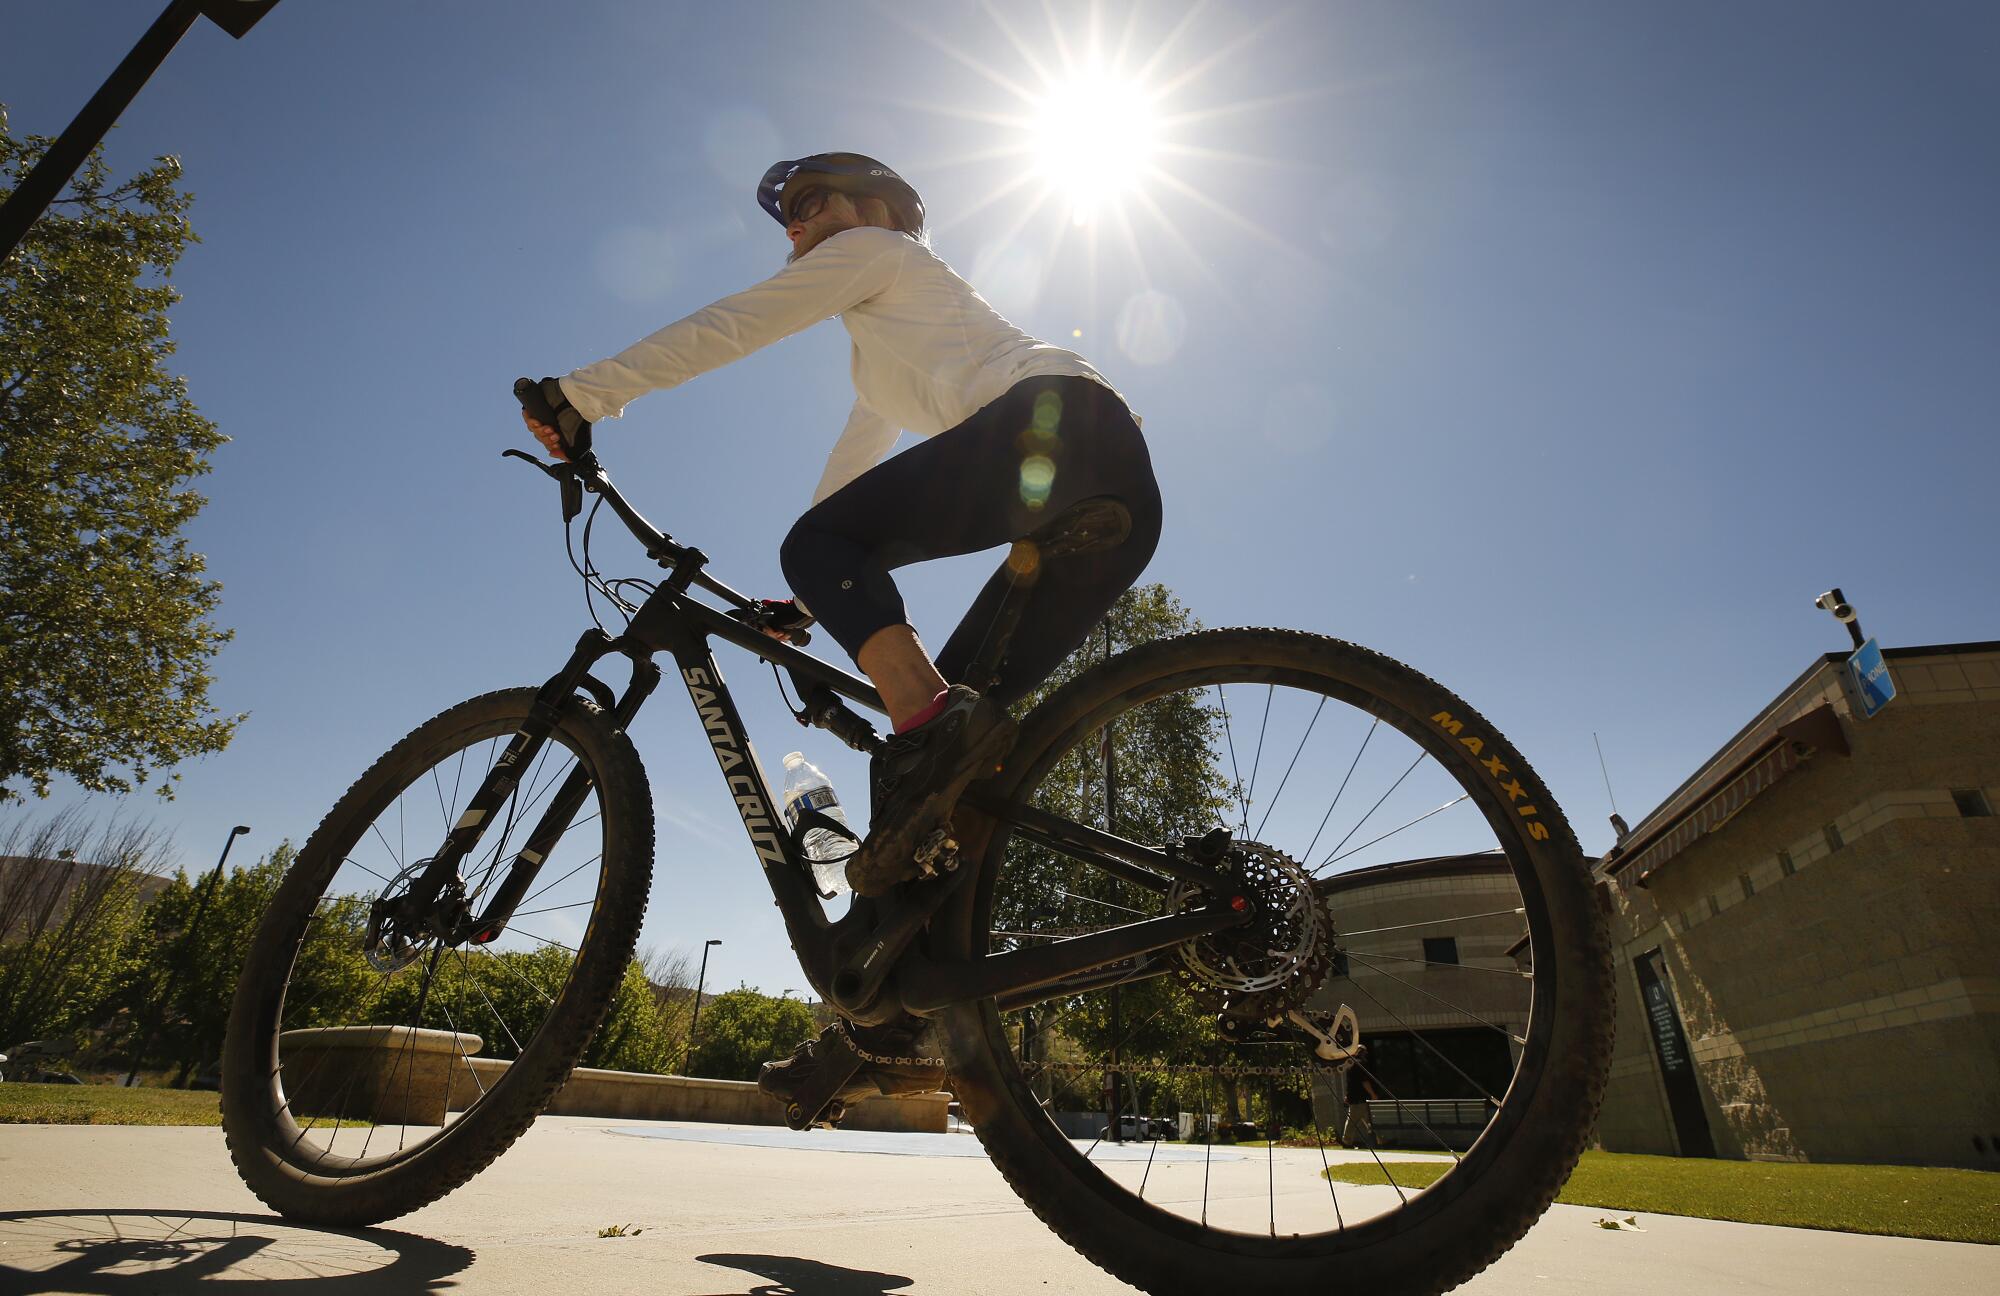 Patti Costello wasn't going to let a little heat stop her from her mountain bike ride at Juan Bautista de Anza Park.